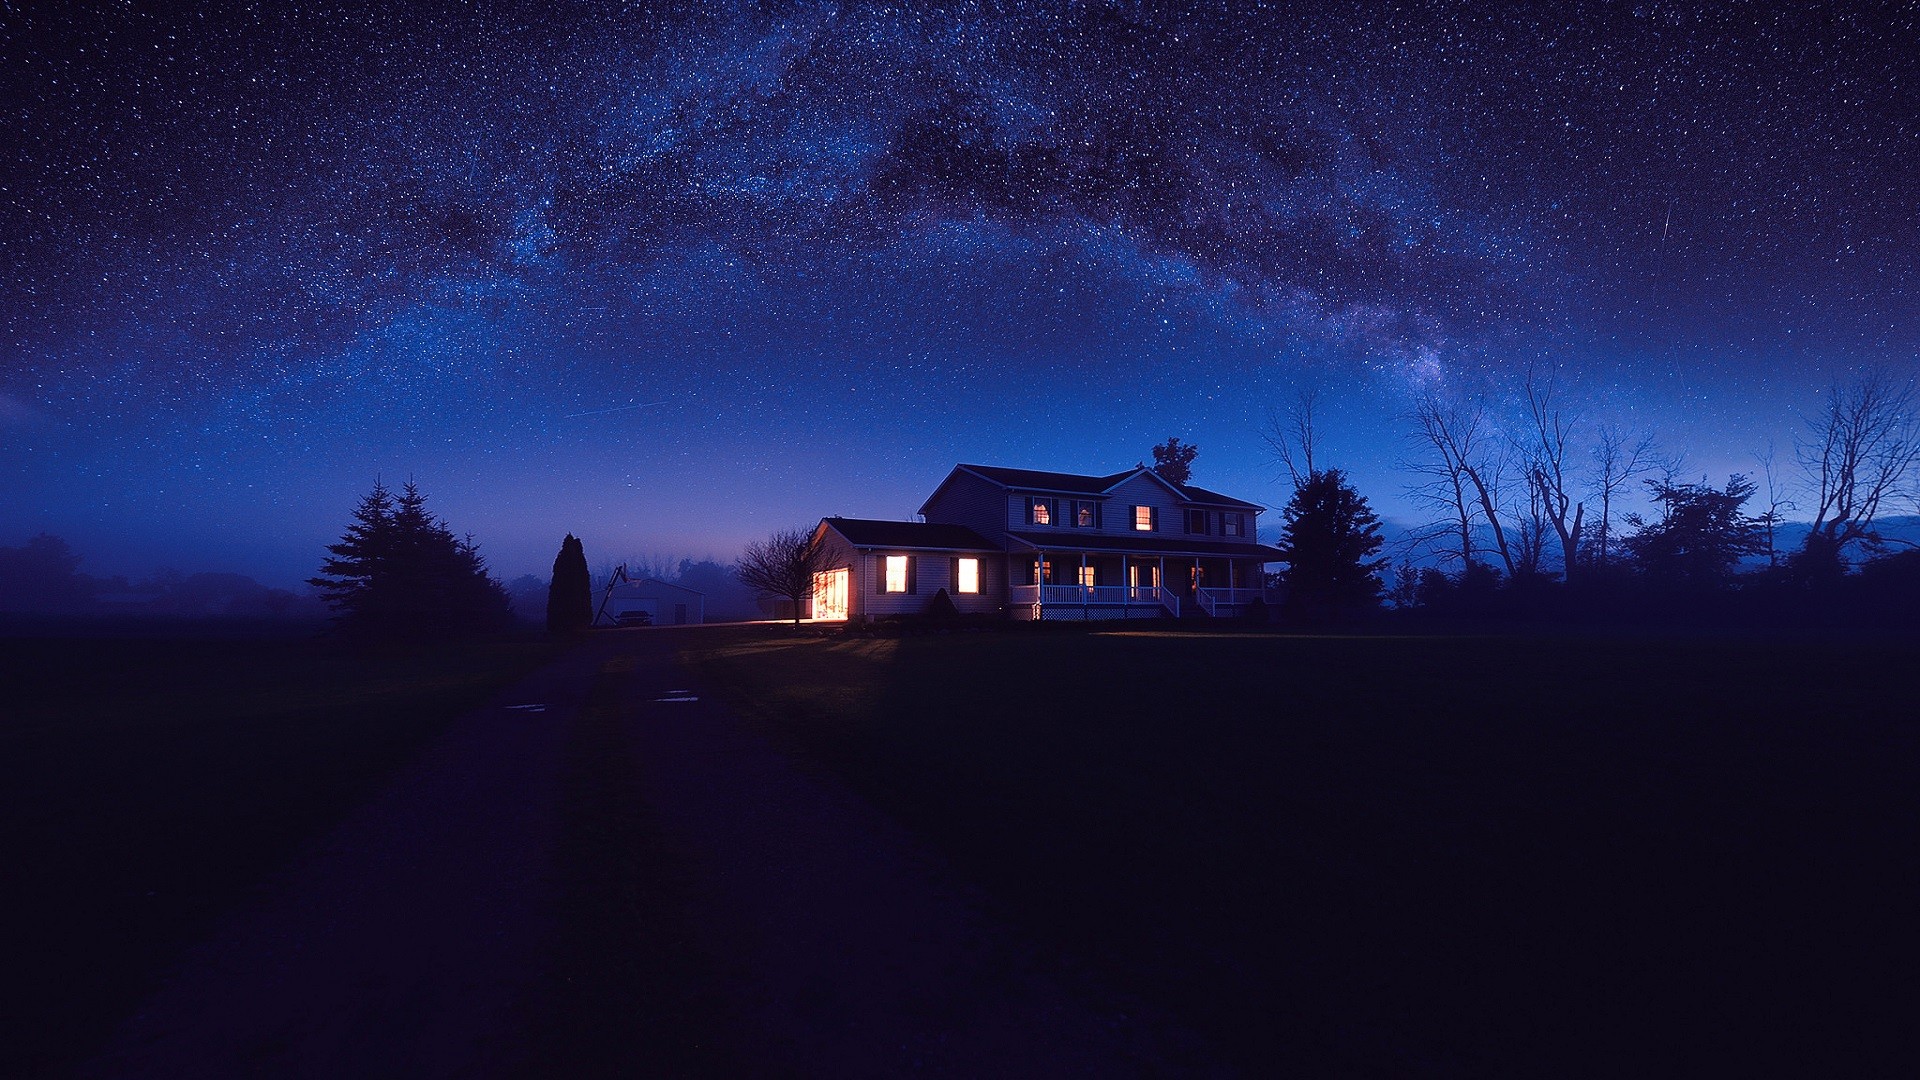 General 1920x1080 starry night house outdoors night night sky sky dirt road lights Linux low light